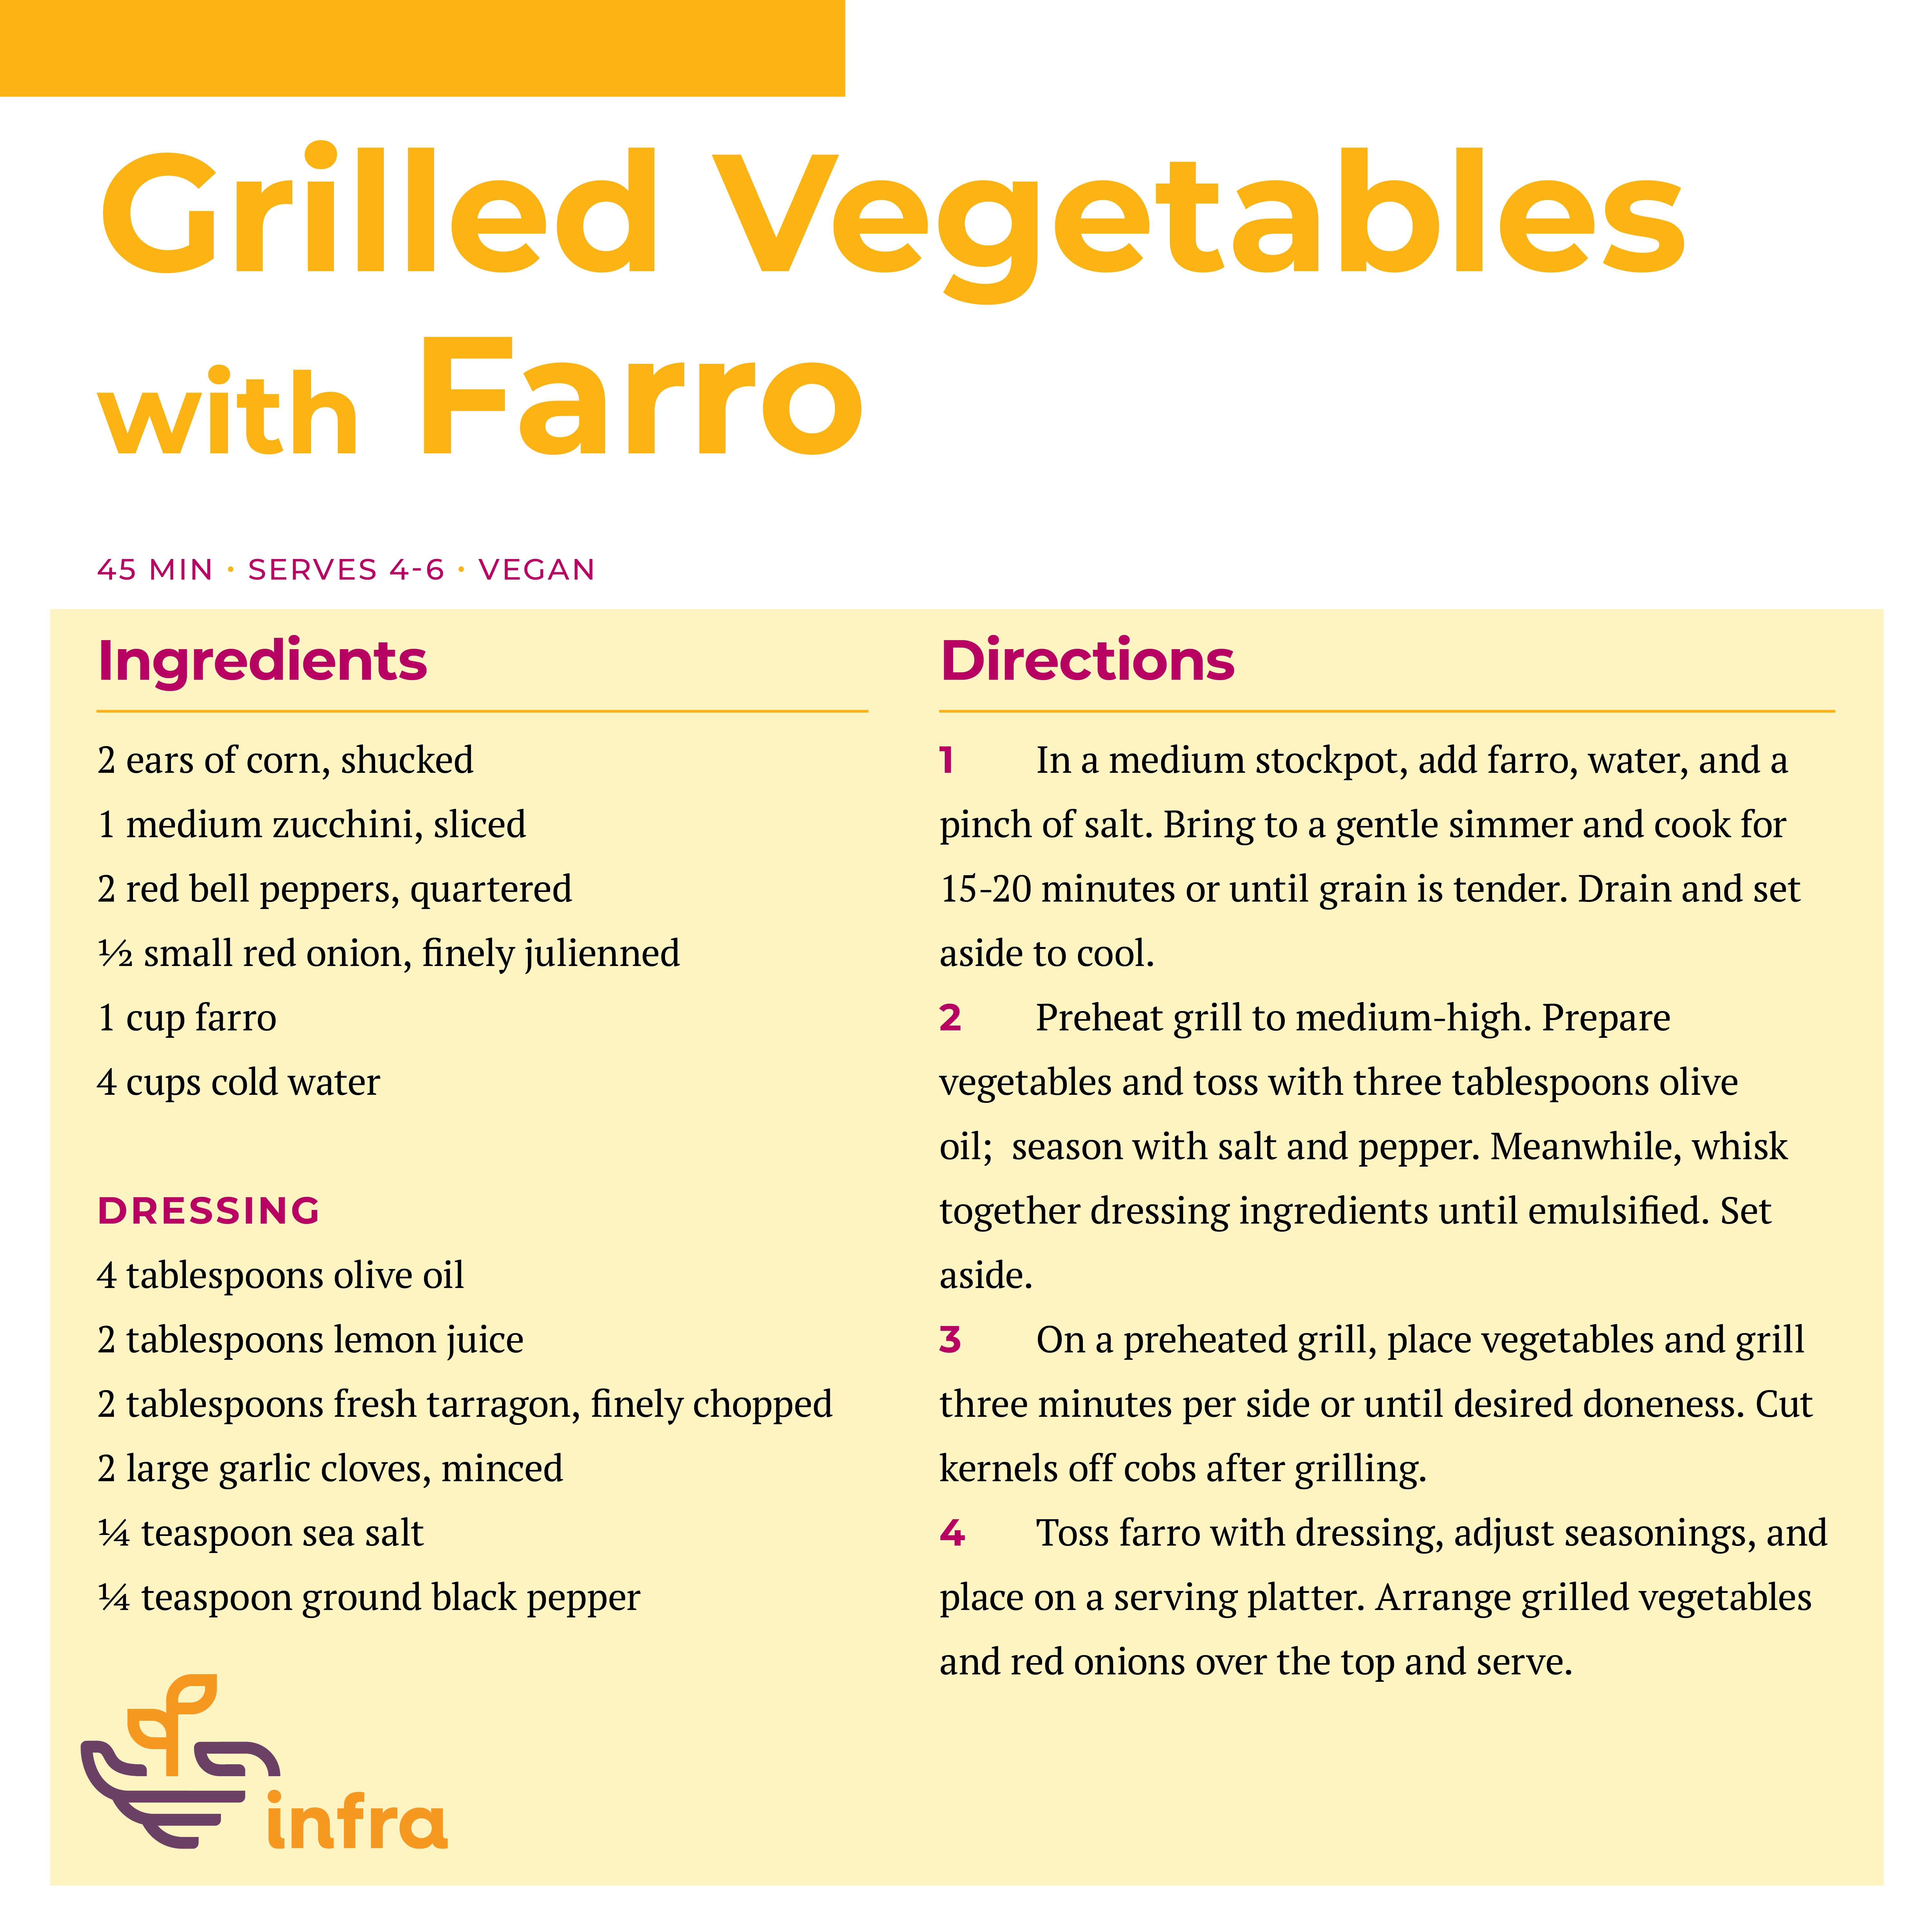 Grilled Vegetables with Farro